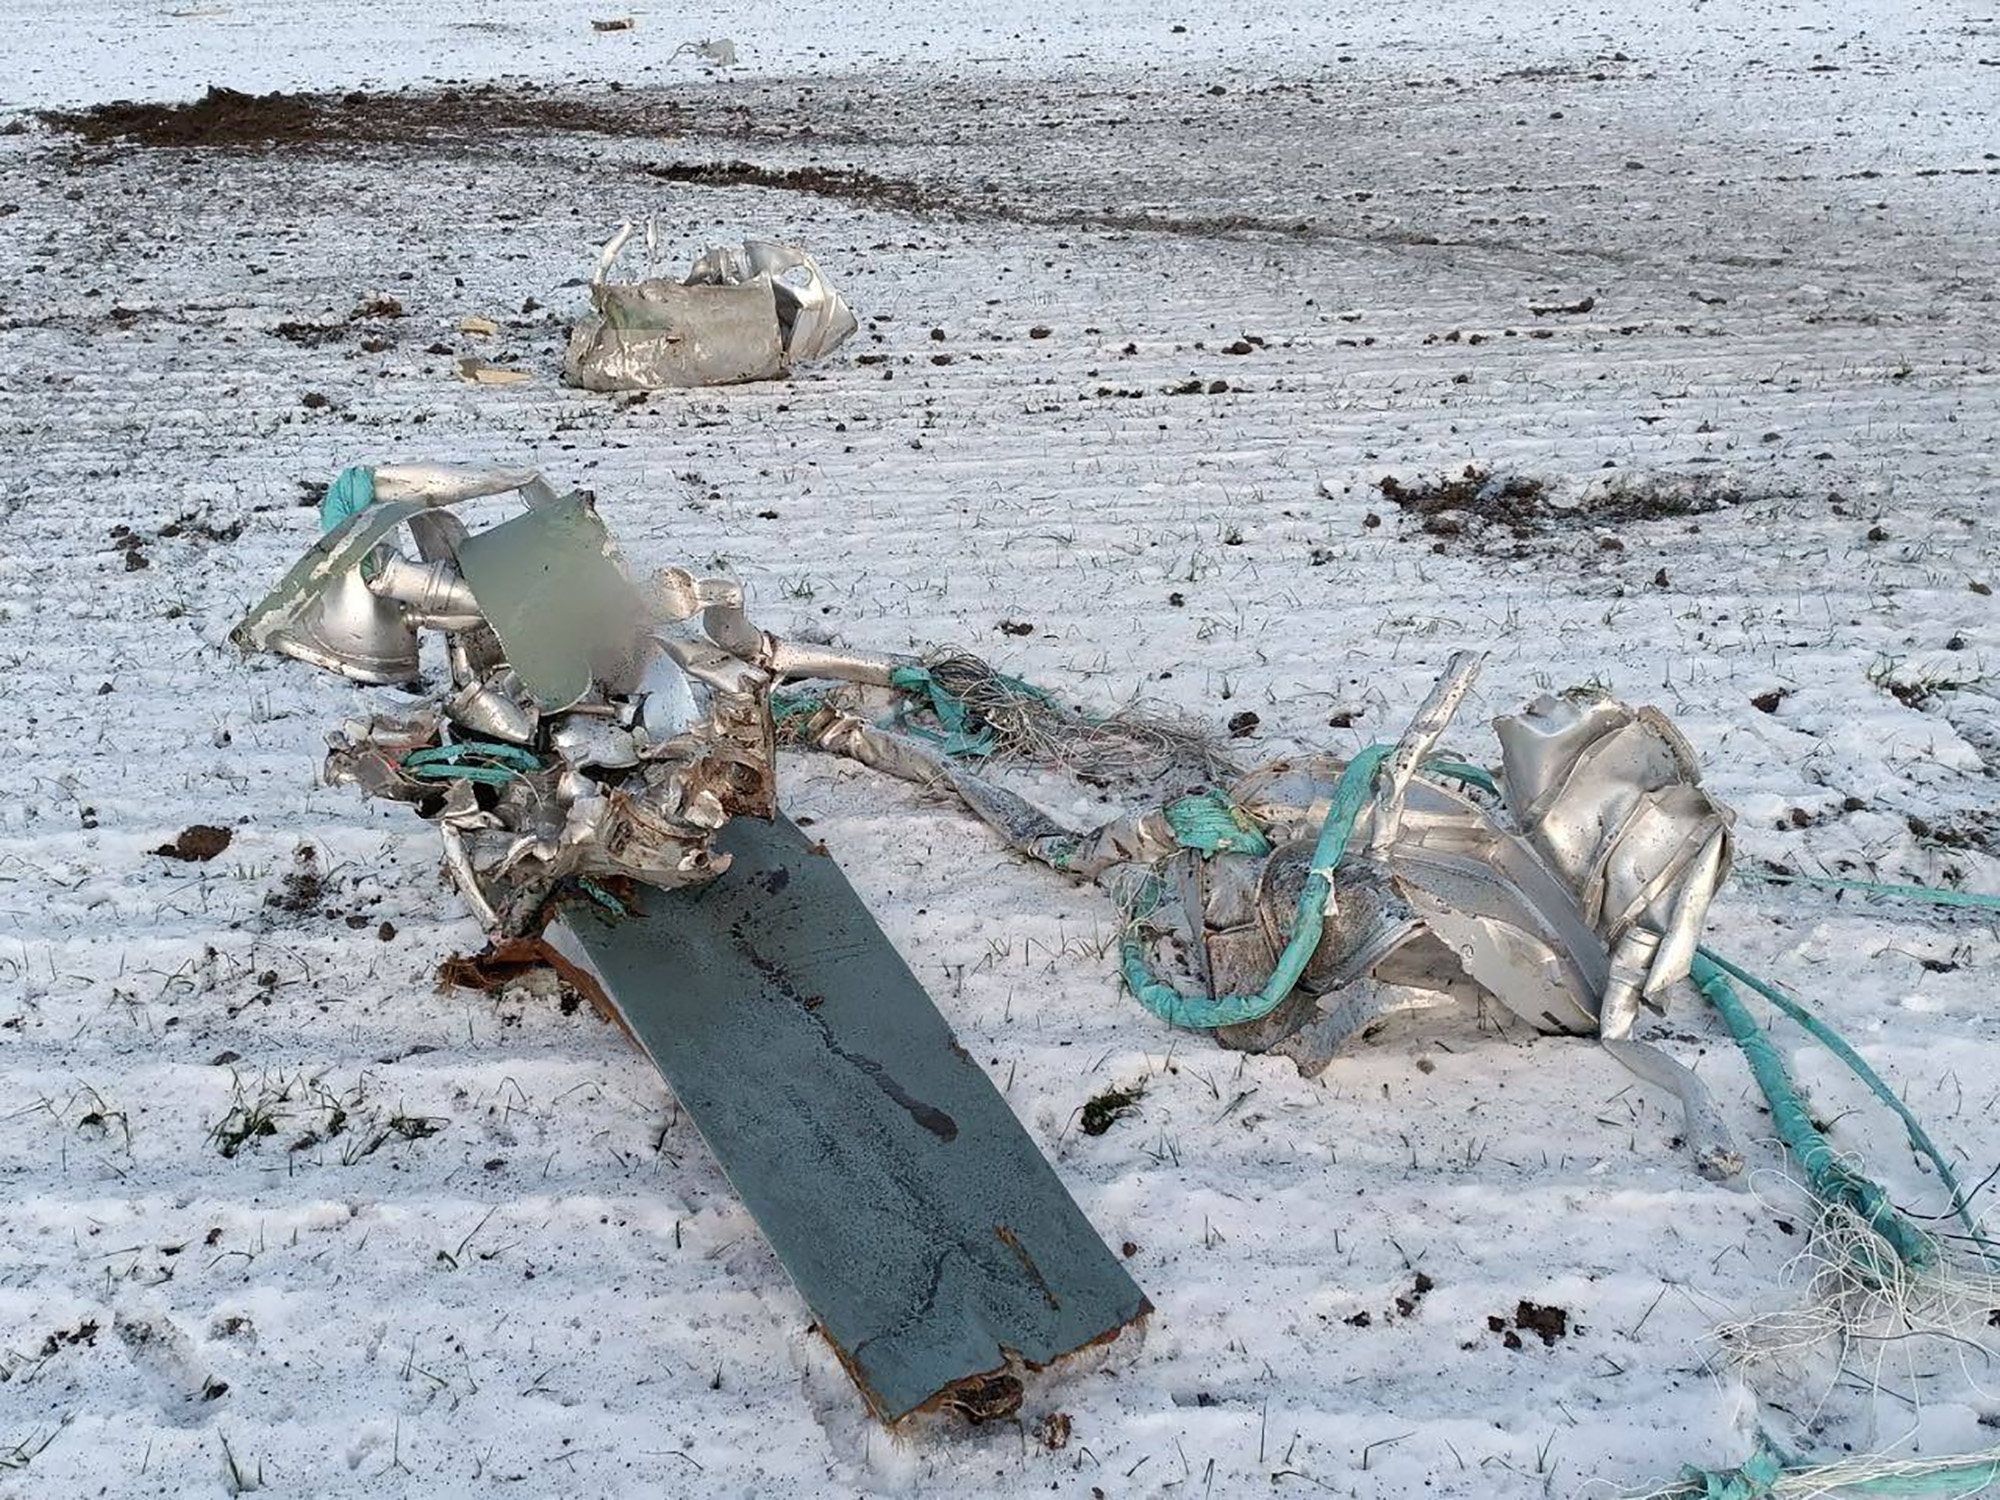 Parts of a Russian cruise missile shot down by the Ukrainian Air Defence Forces are seen in a field in the Kyiv region, Ukraine, on December 5.